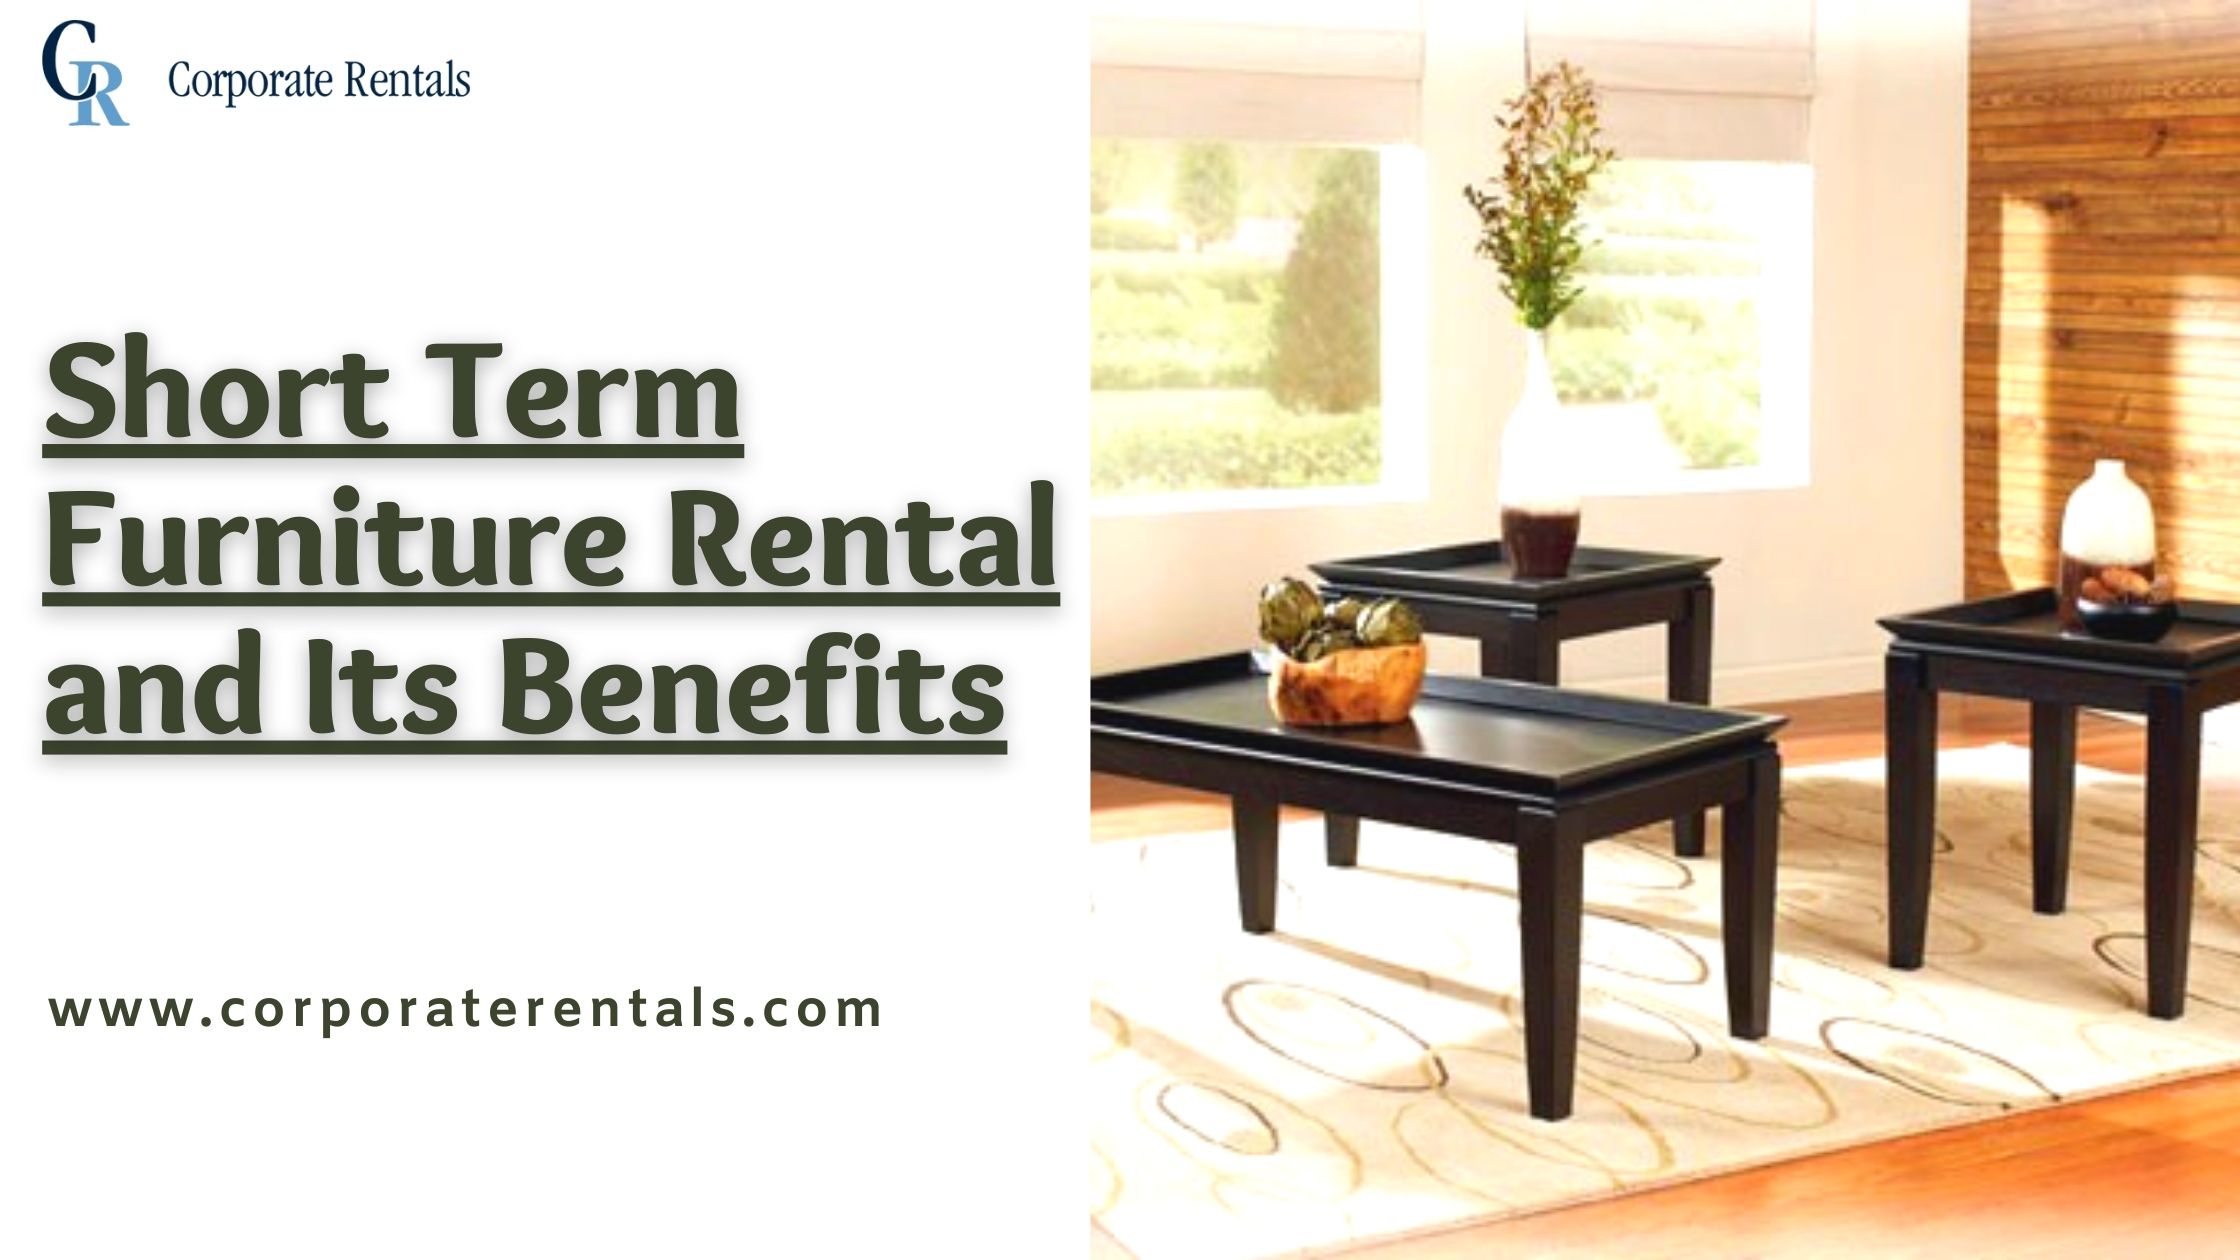 Short Term Furniture Rental and Its Benefits